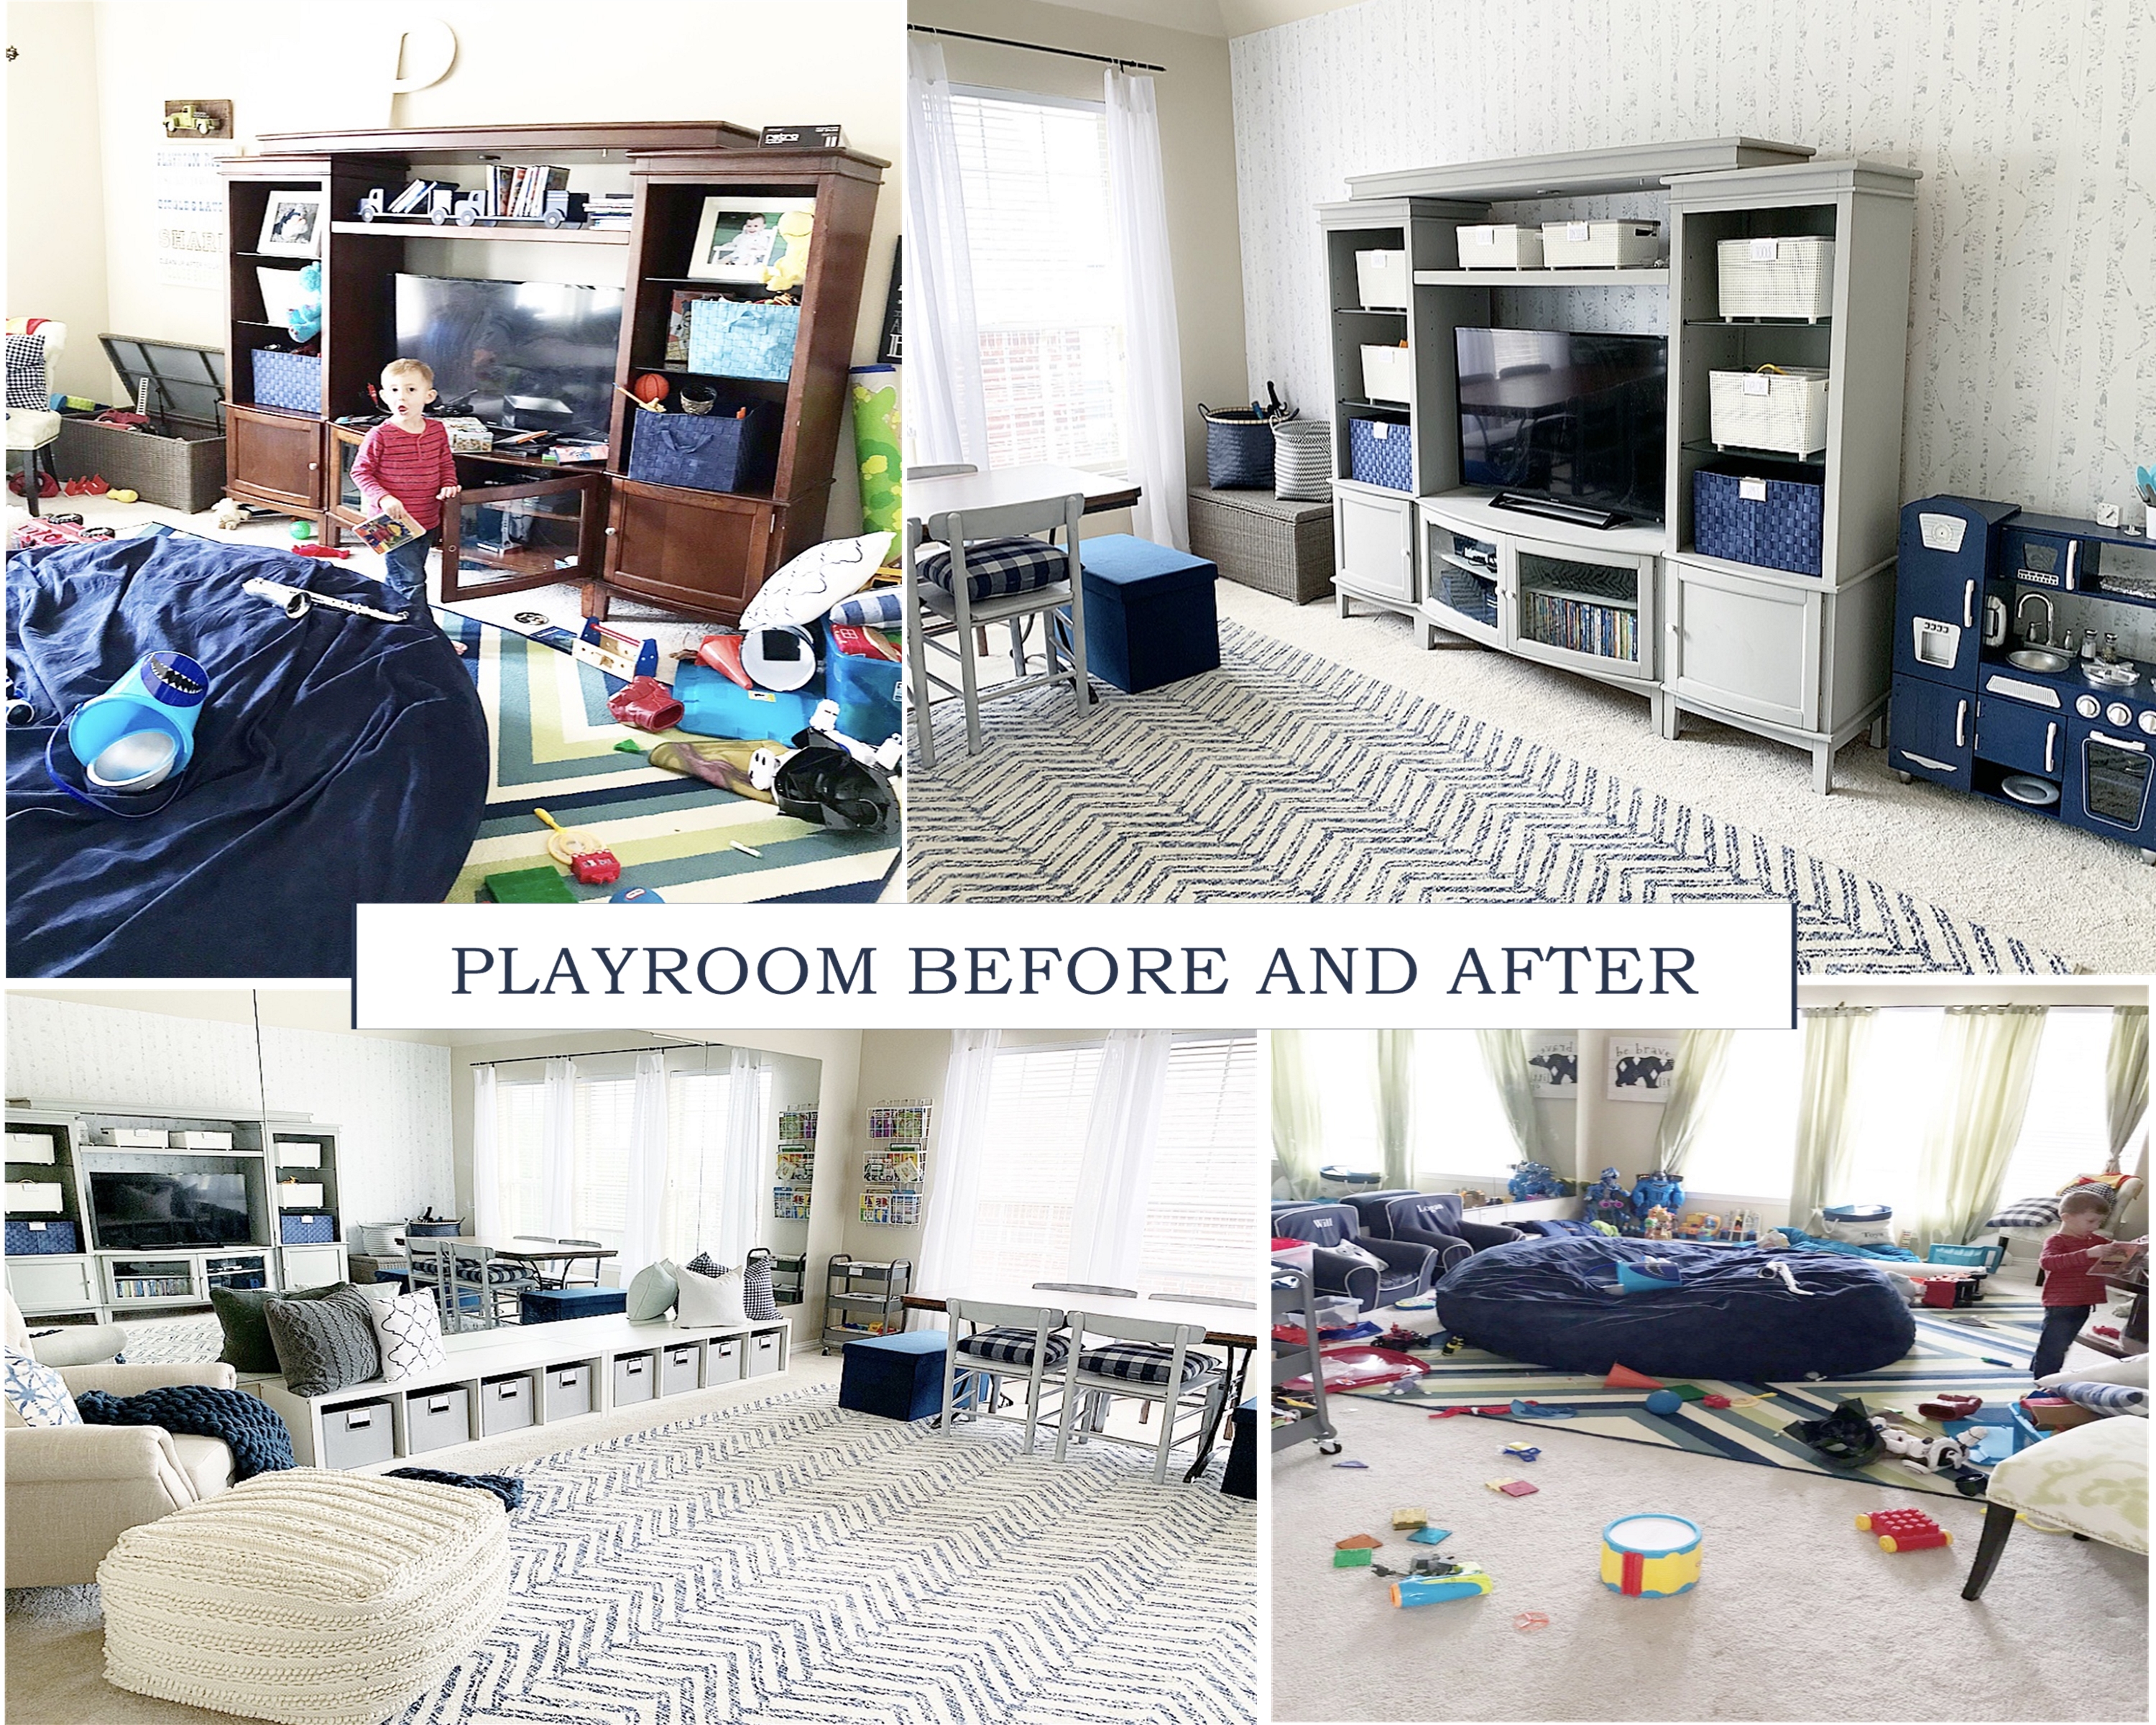 Playroom Before and after 